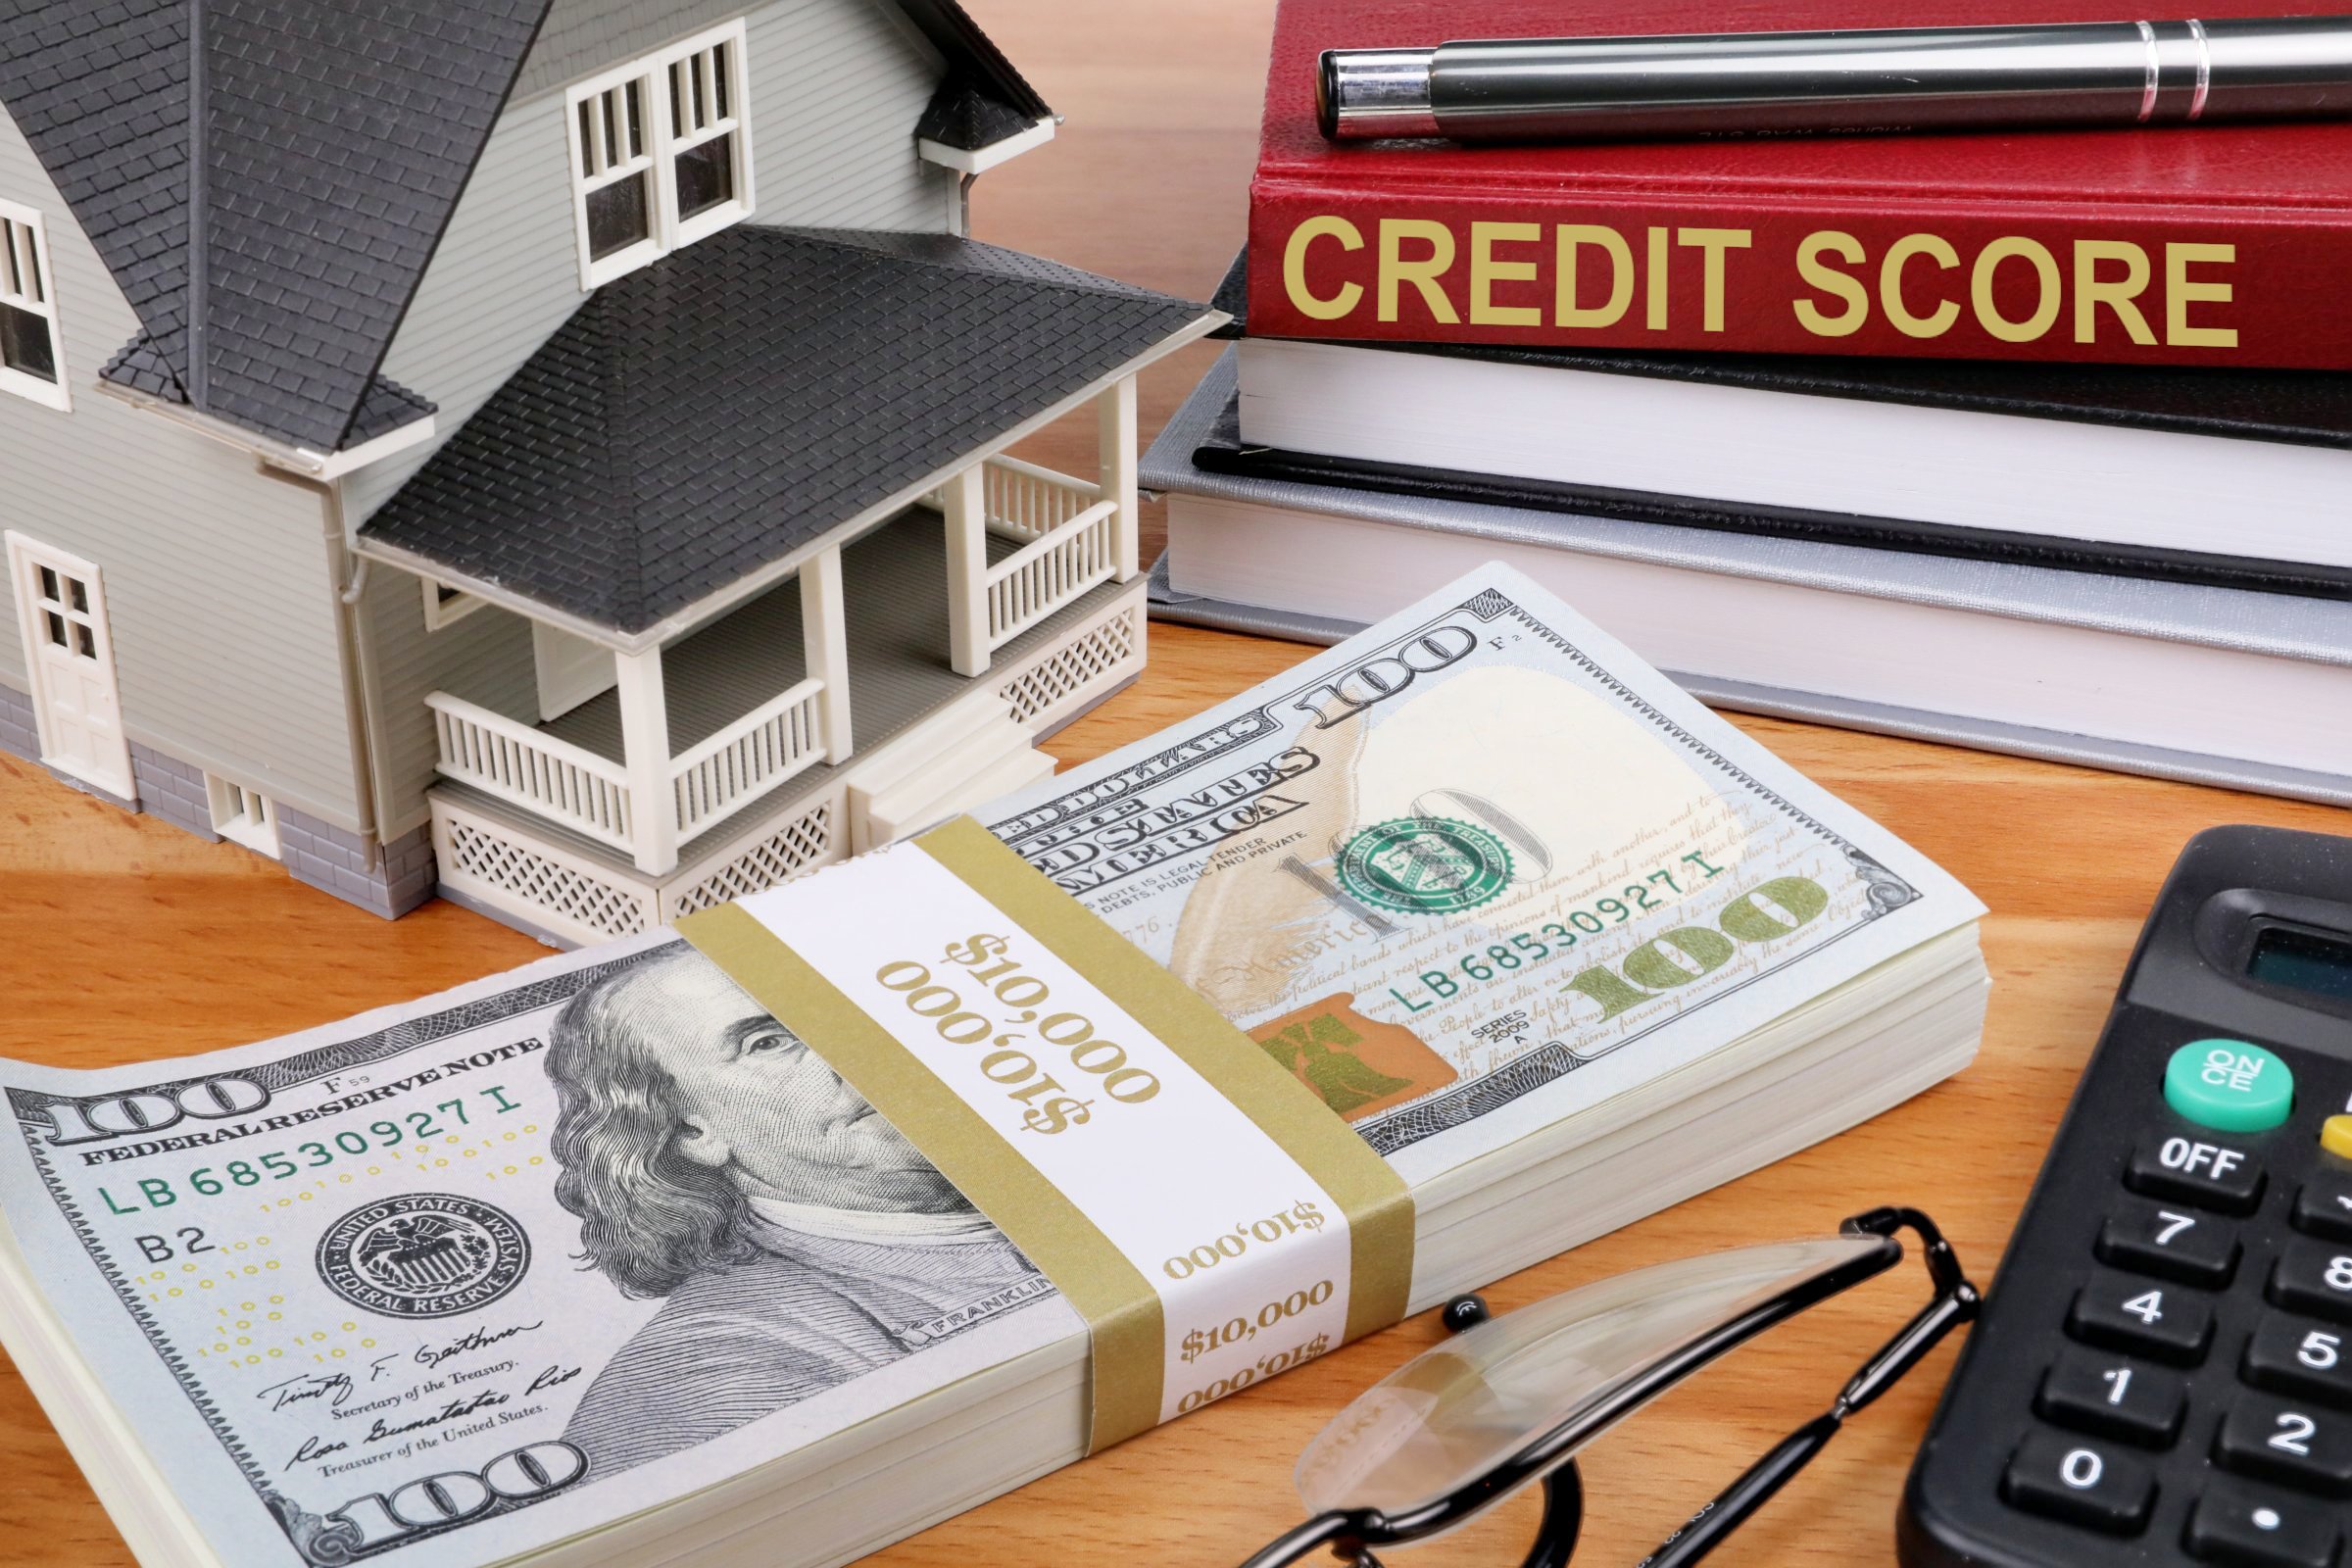 Can You Get A Loan With A 500 Credit Score?